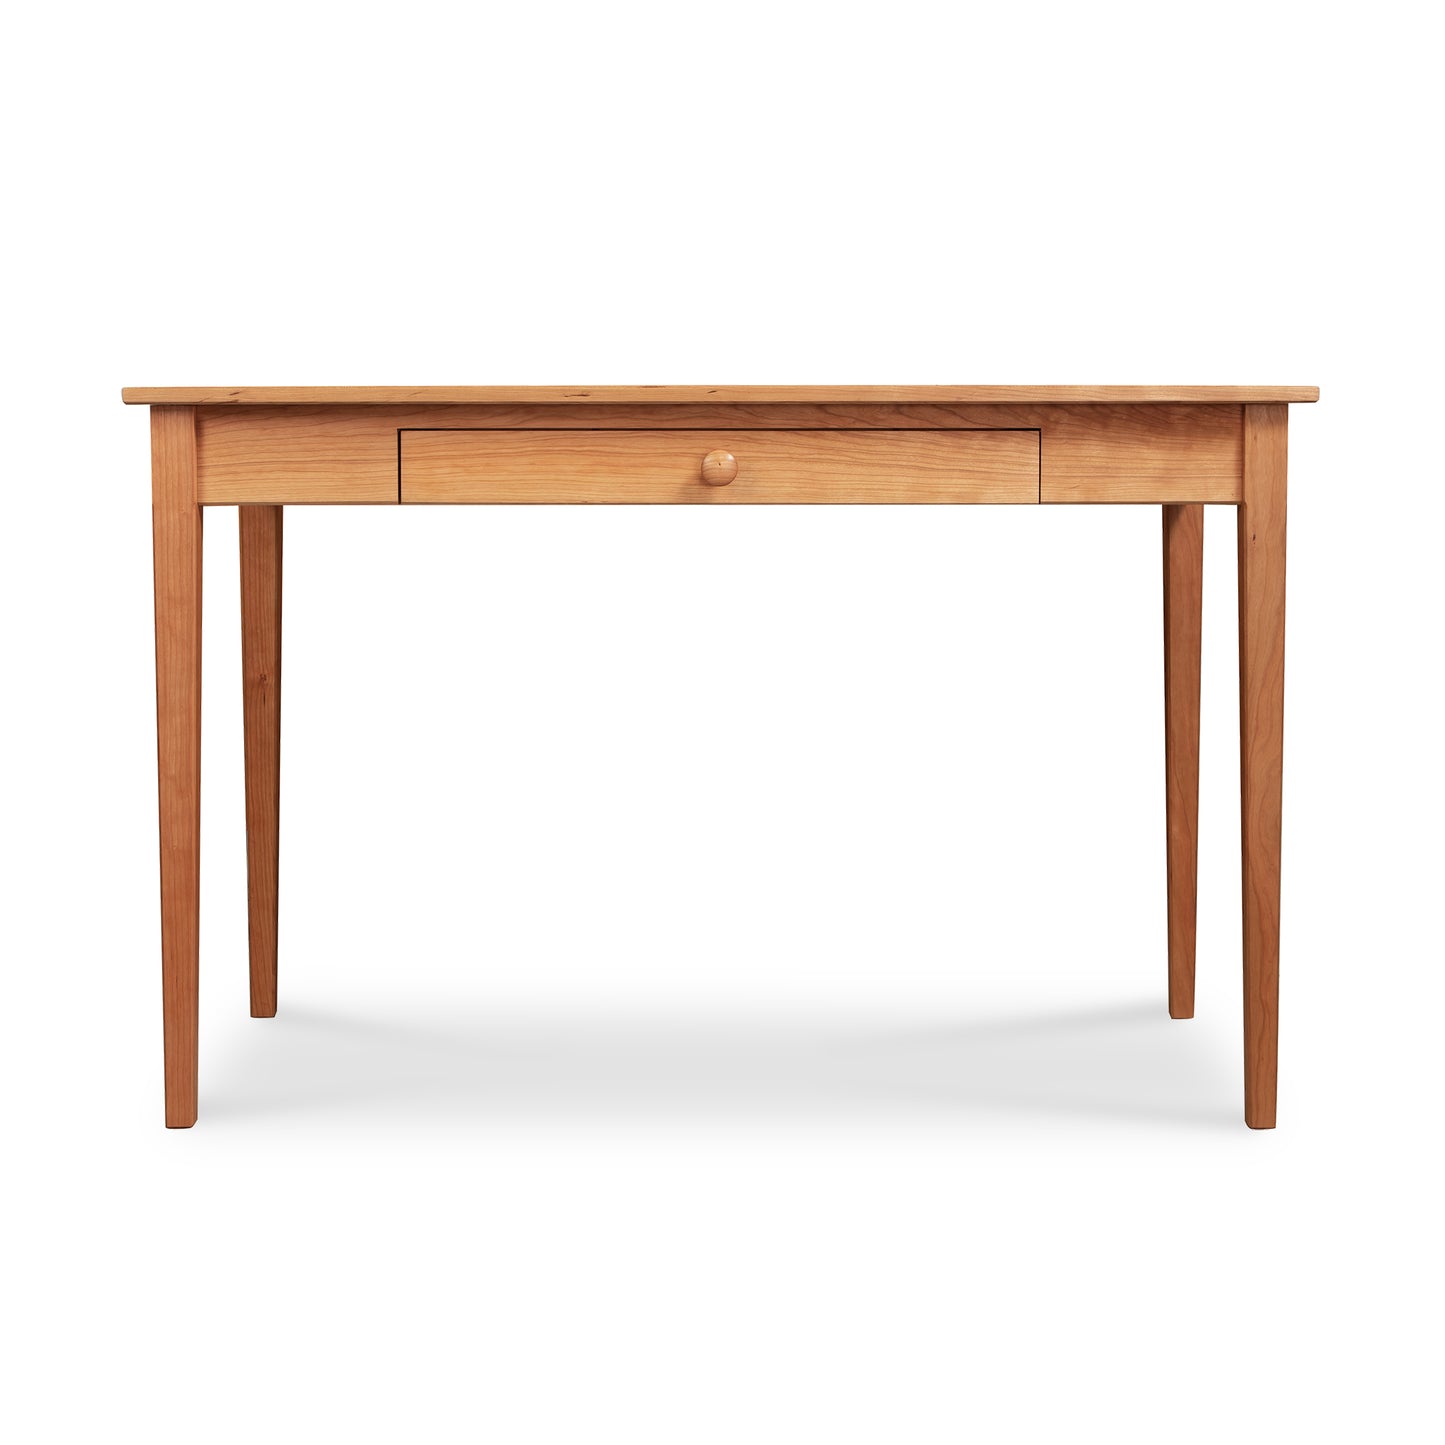 A Maple Corner Woodworks Vermont Shaker Writing Desk with a drawer on it.